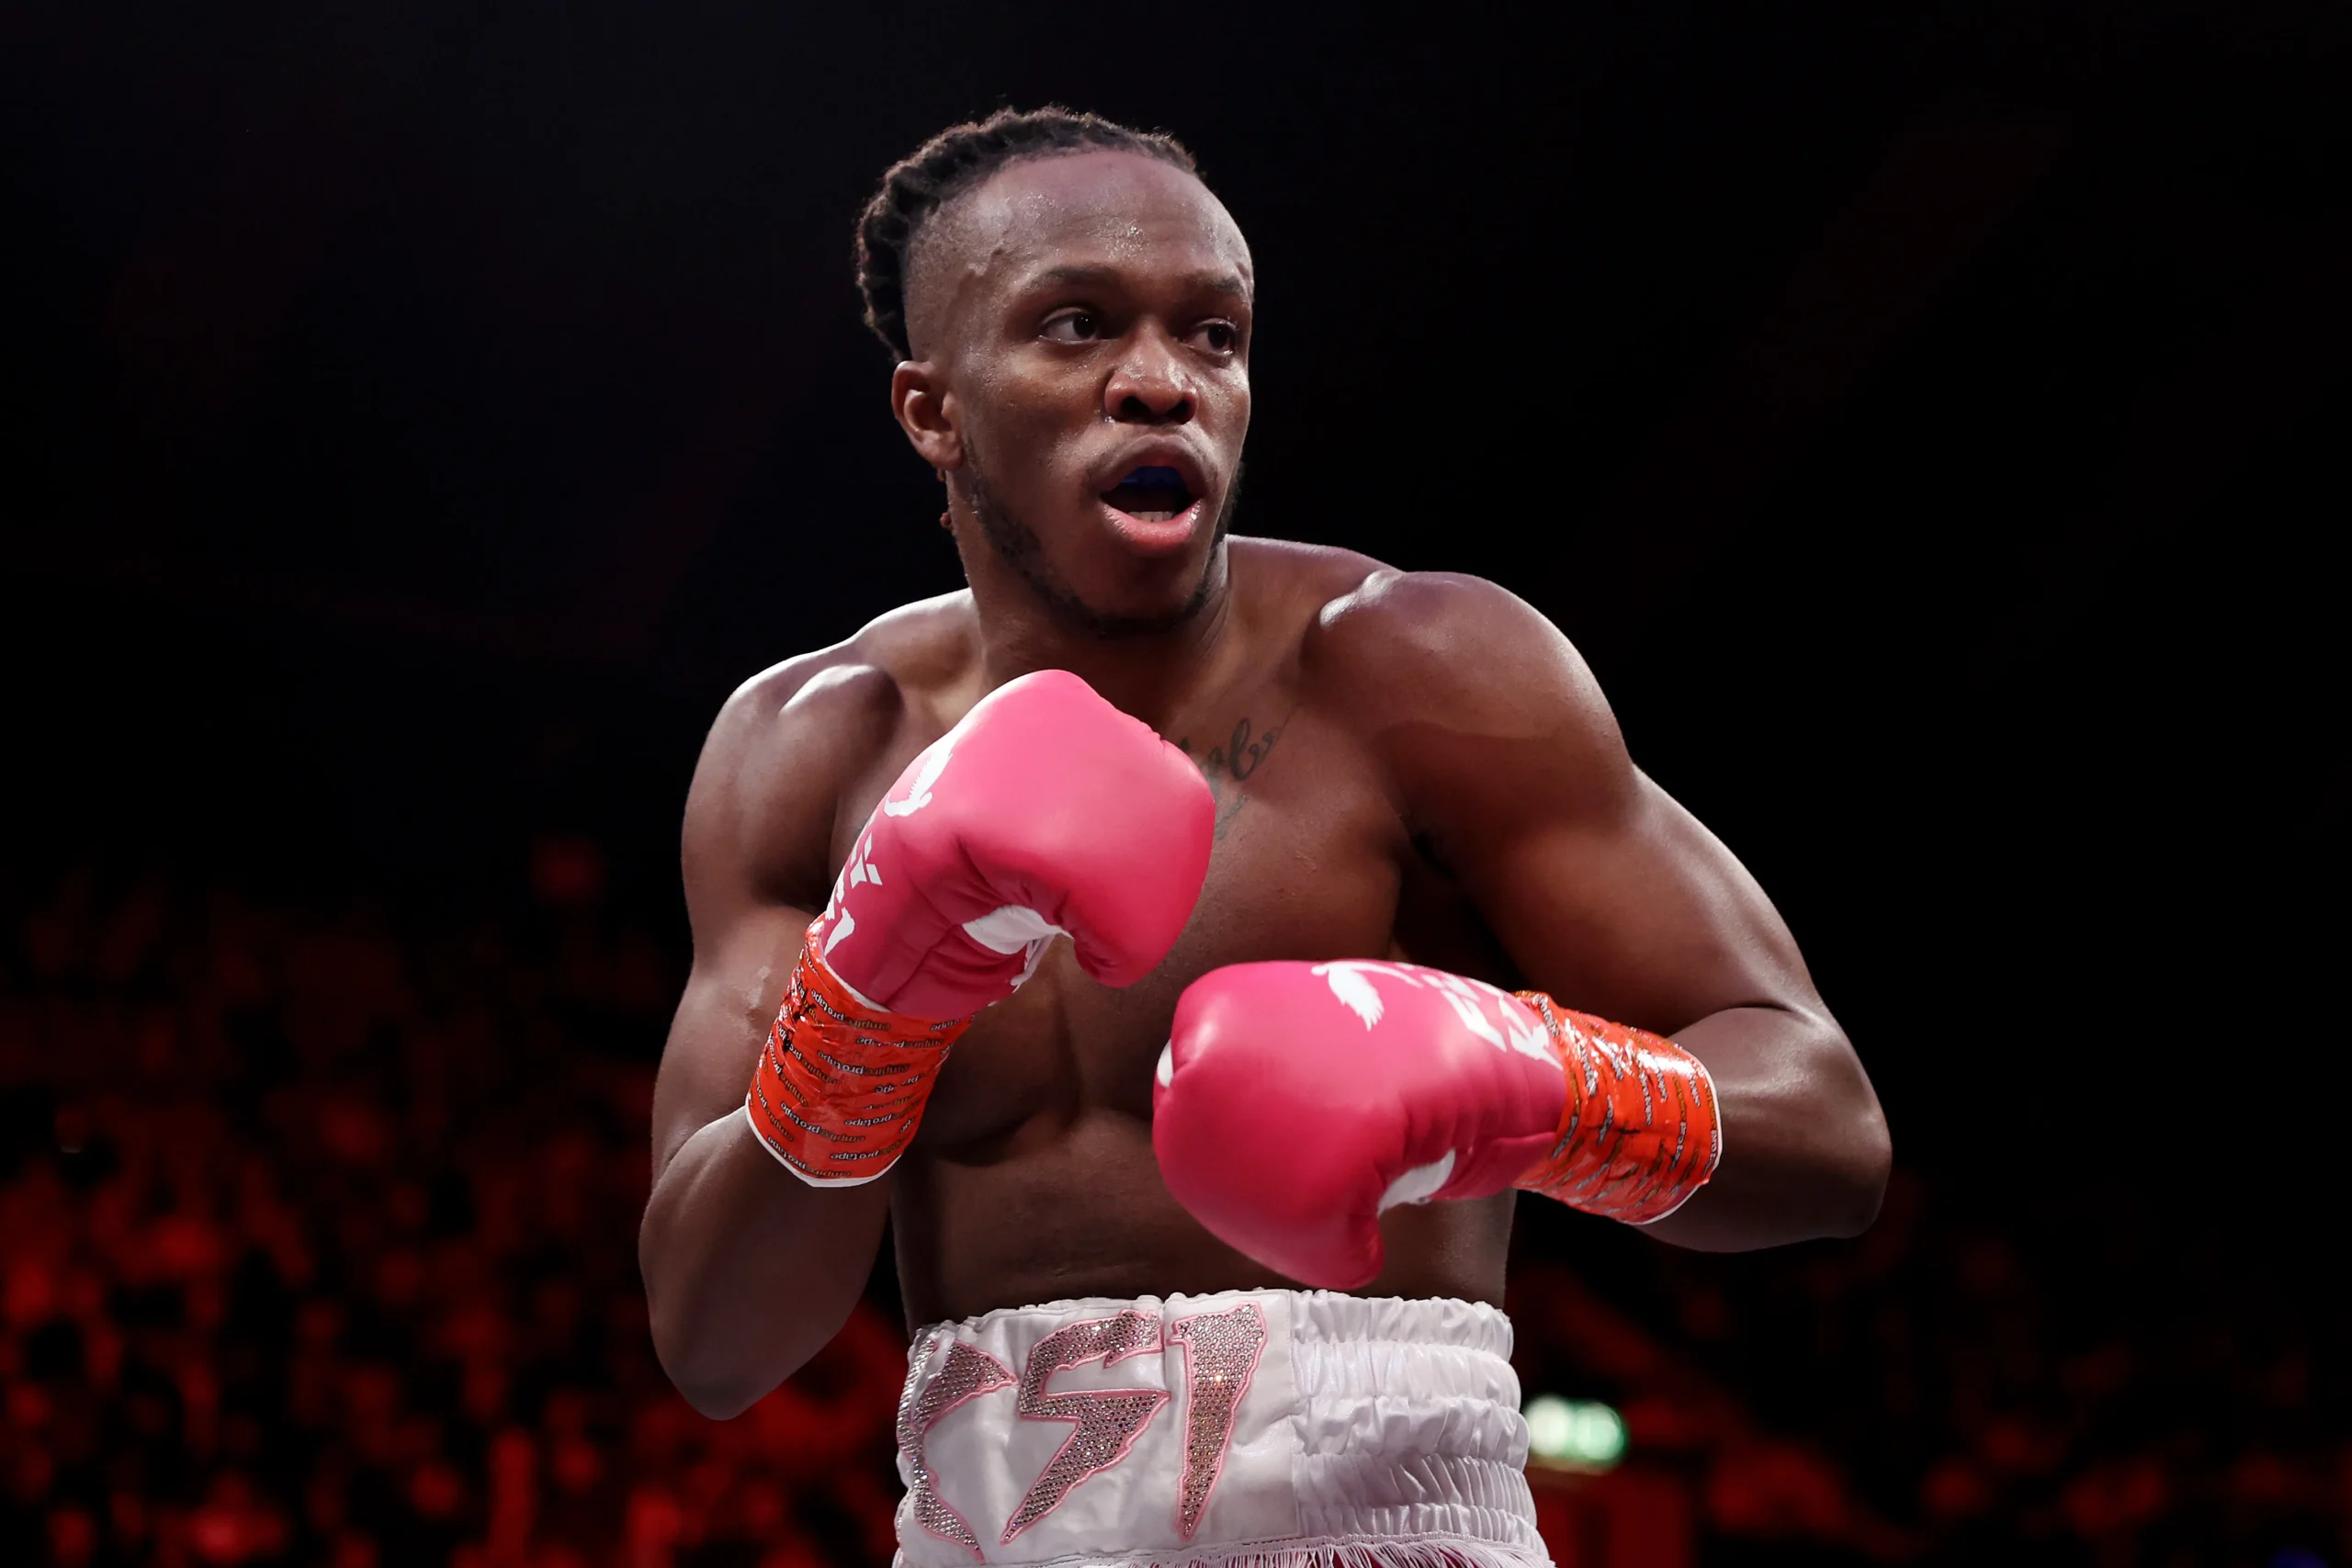 Why did PBA suspend KSI’s Misfits Boxing promotions license? Everything you need to know